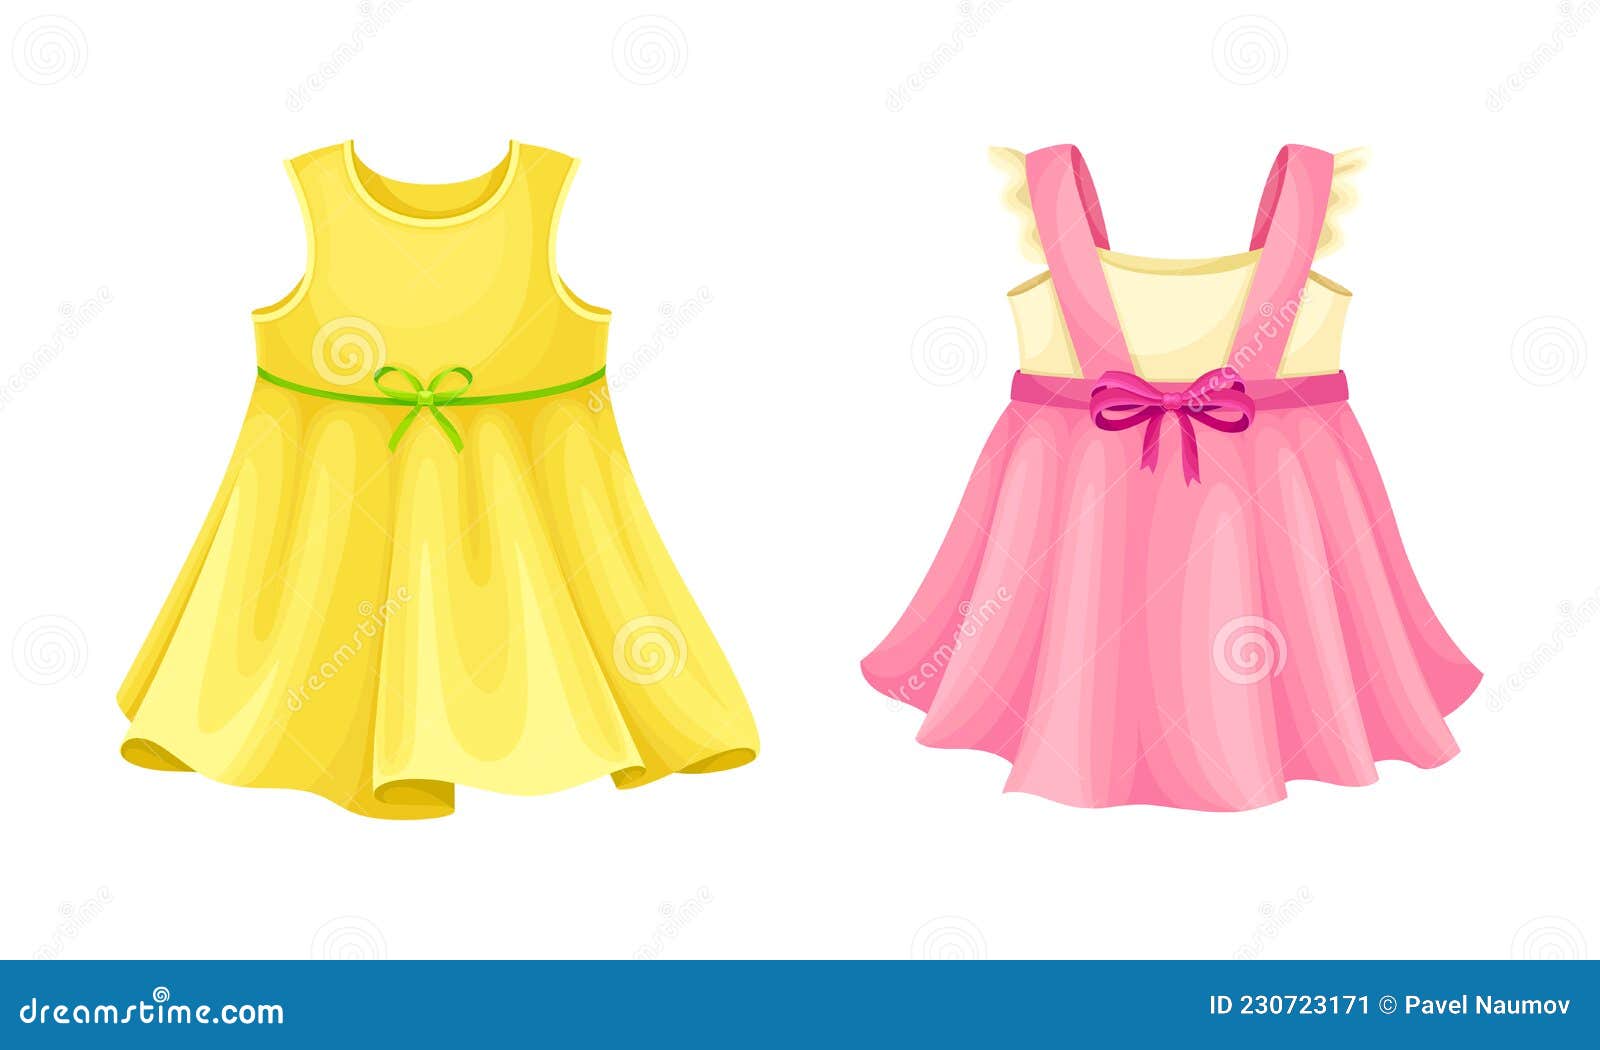 Summer Clothes for Little Girl Set. Cute Pink and Yellow Dresses Cartoon  Vector Illustration Stock Vector - Illustration of design, apparel:  230723171